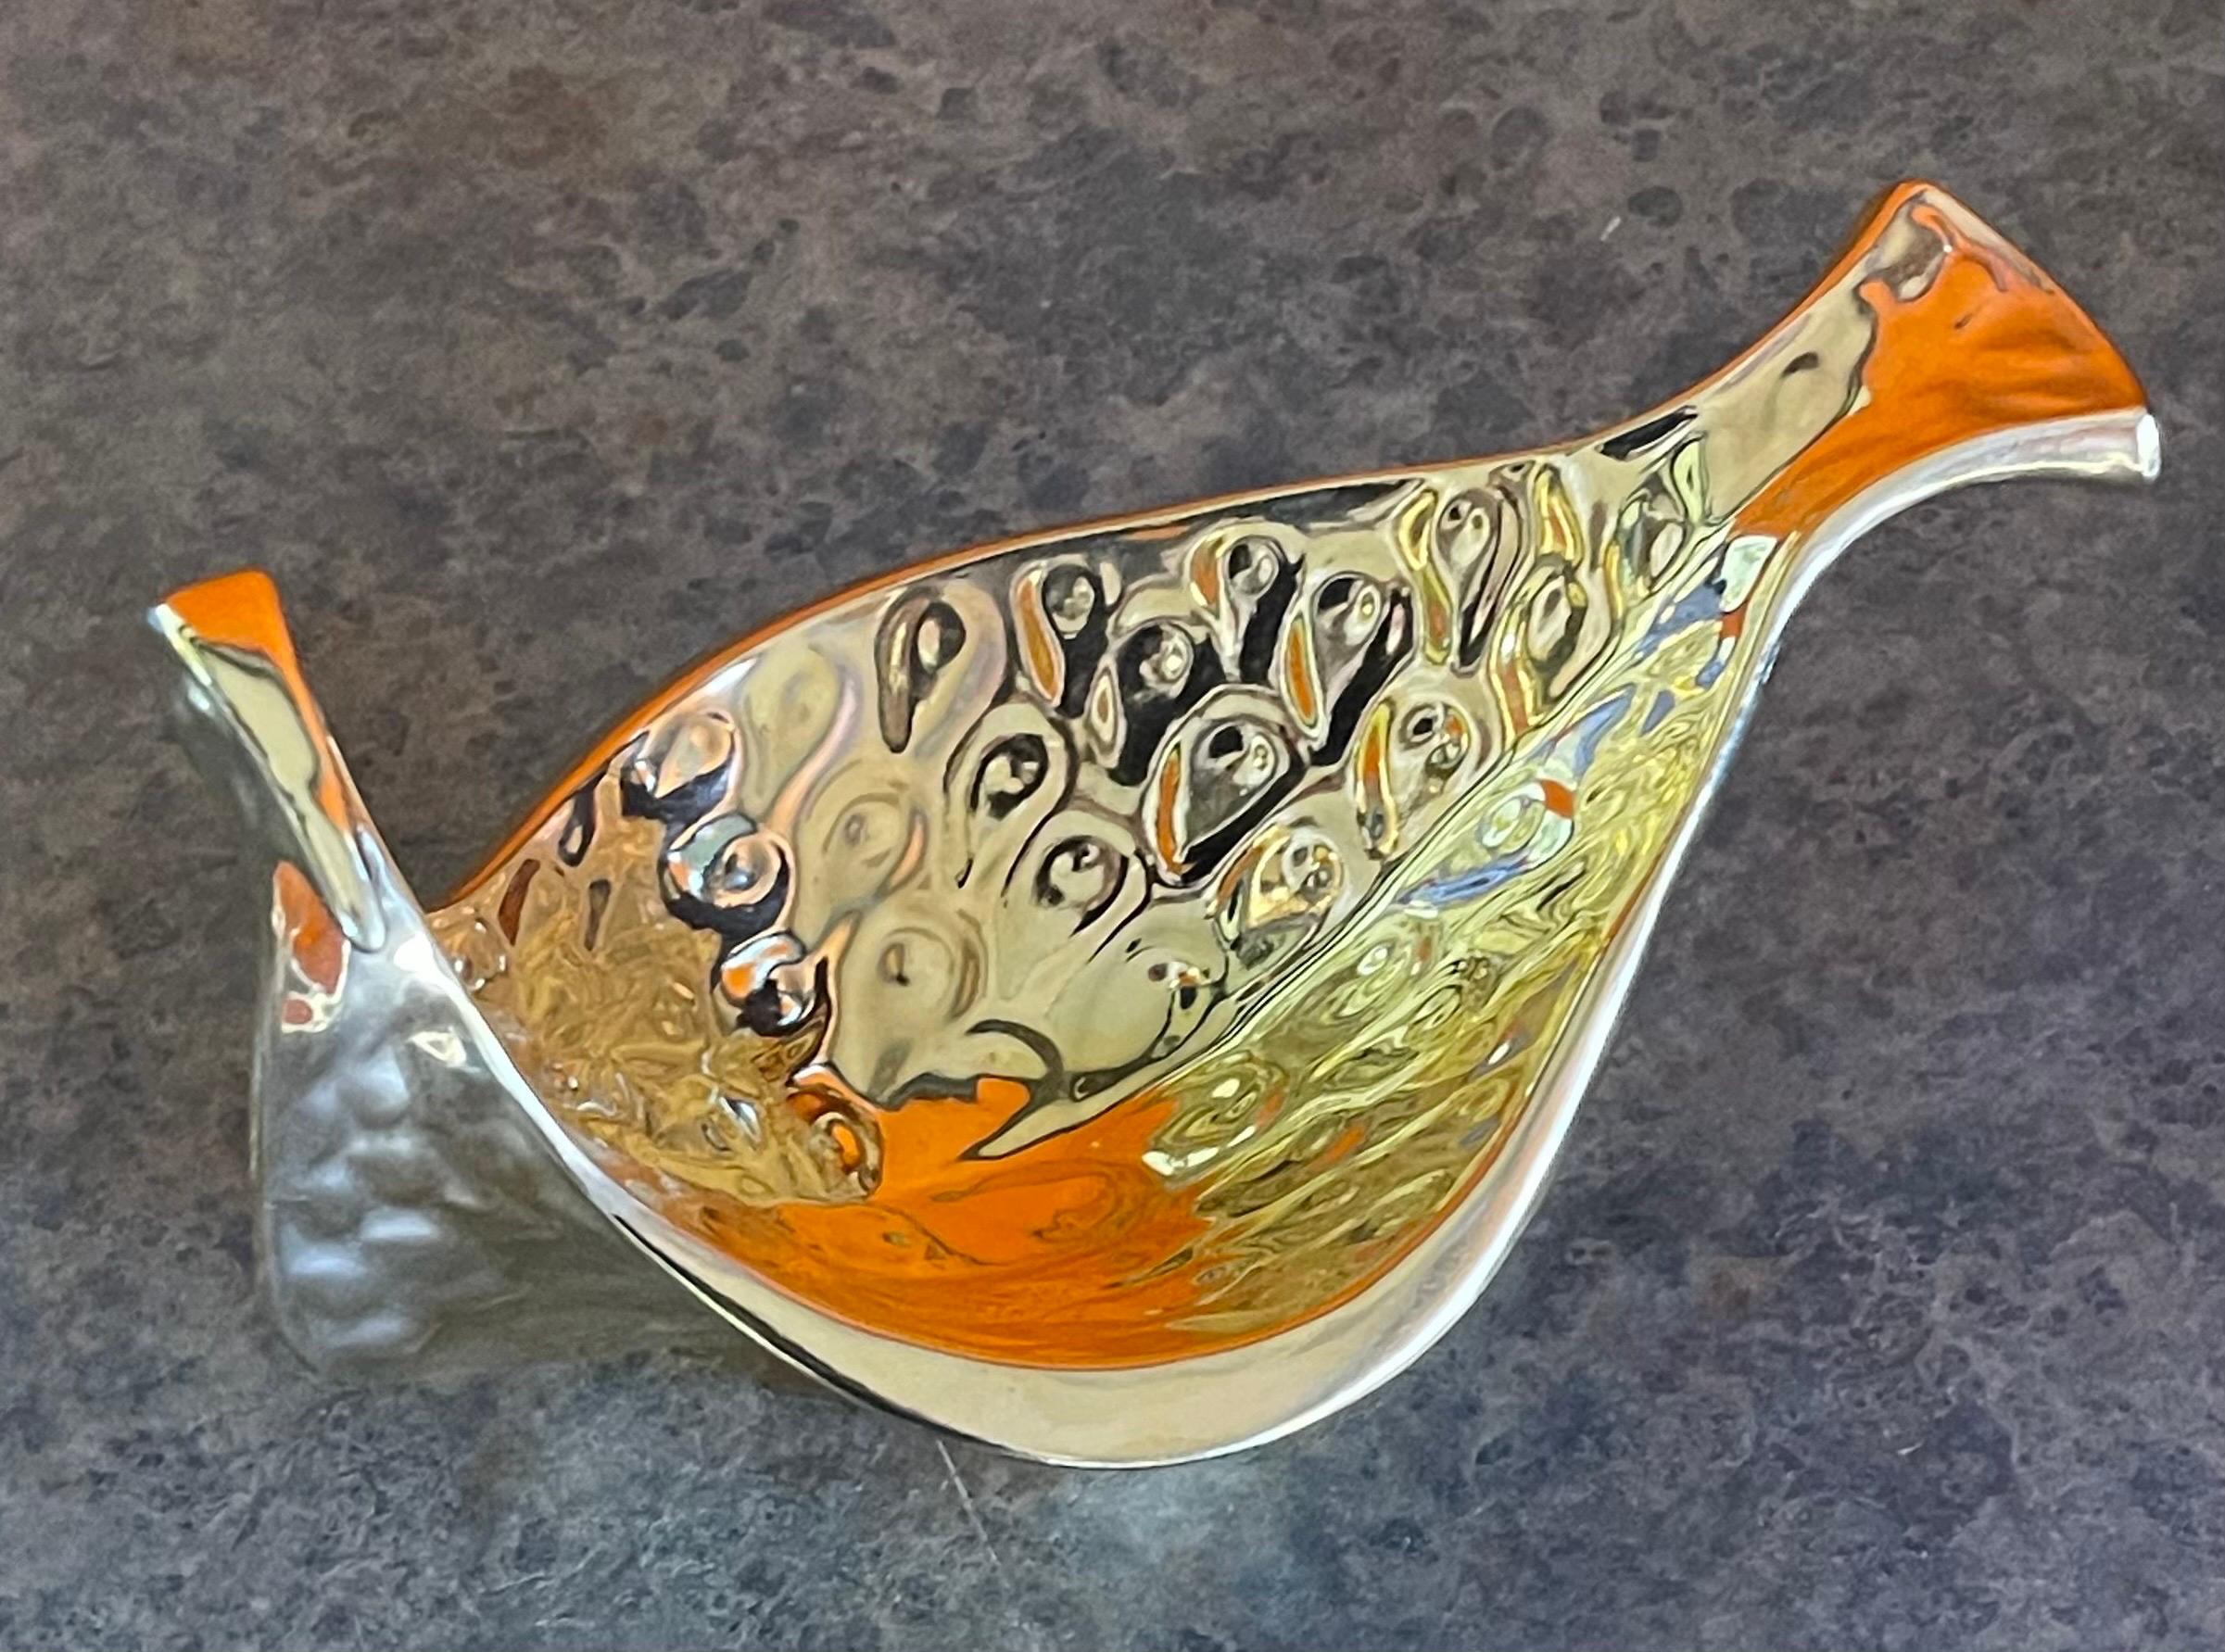 Pair of Gold Ceramic Bird Bowls from